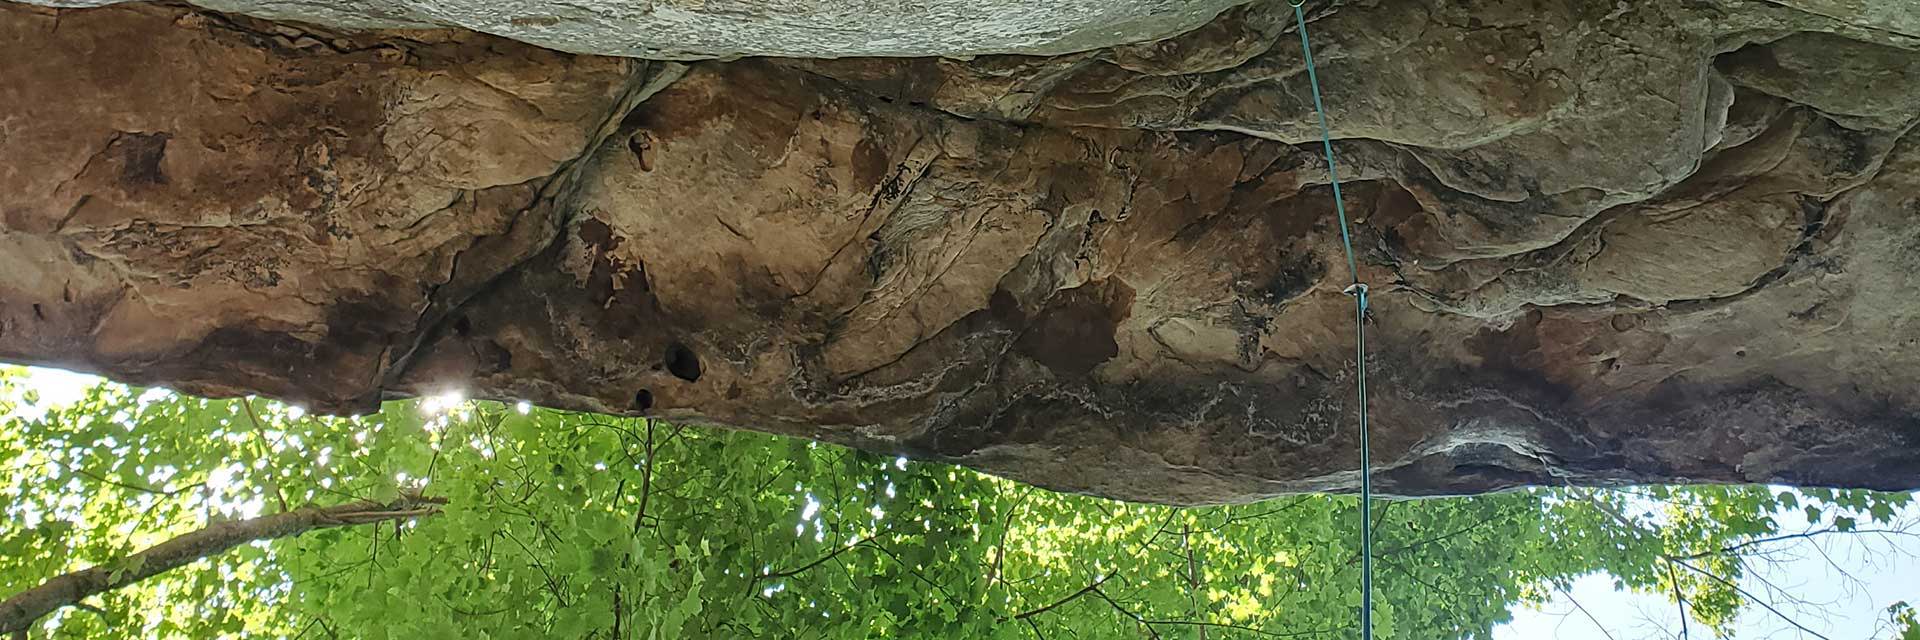 image of Looking up at a rock overhang with rope